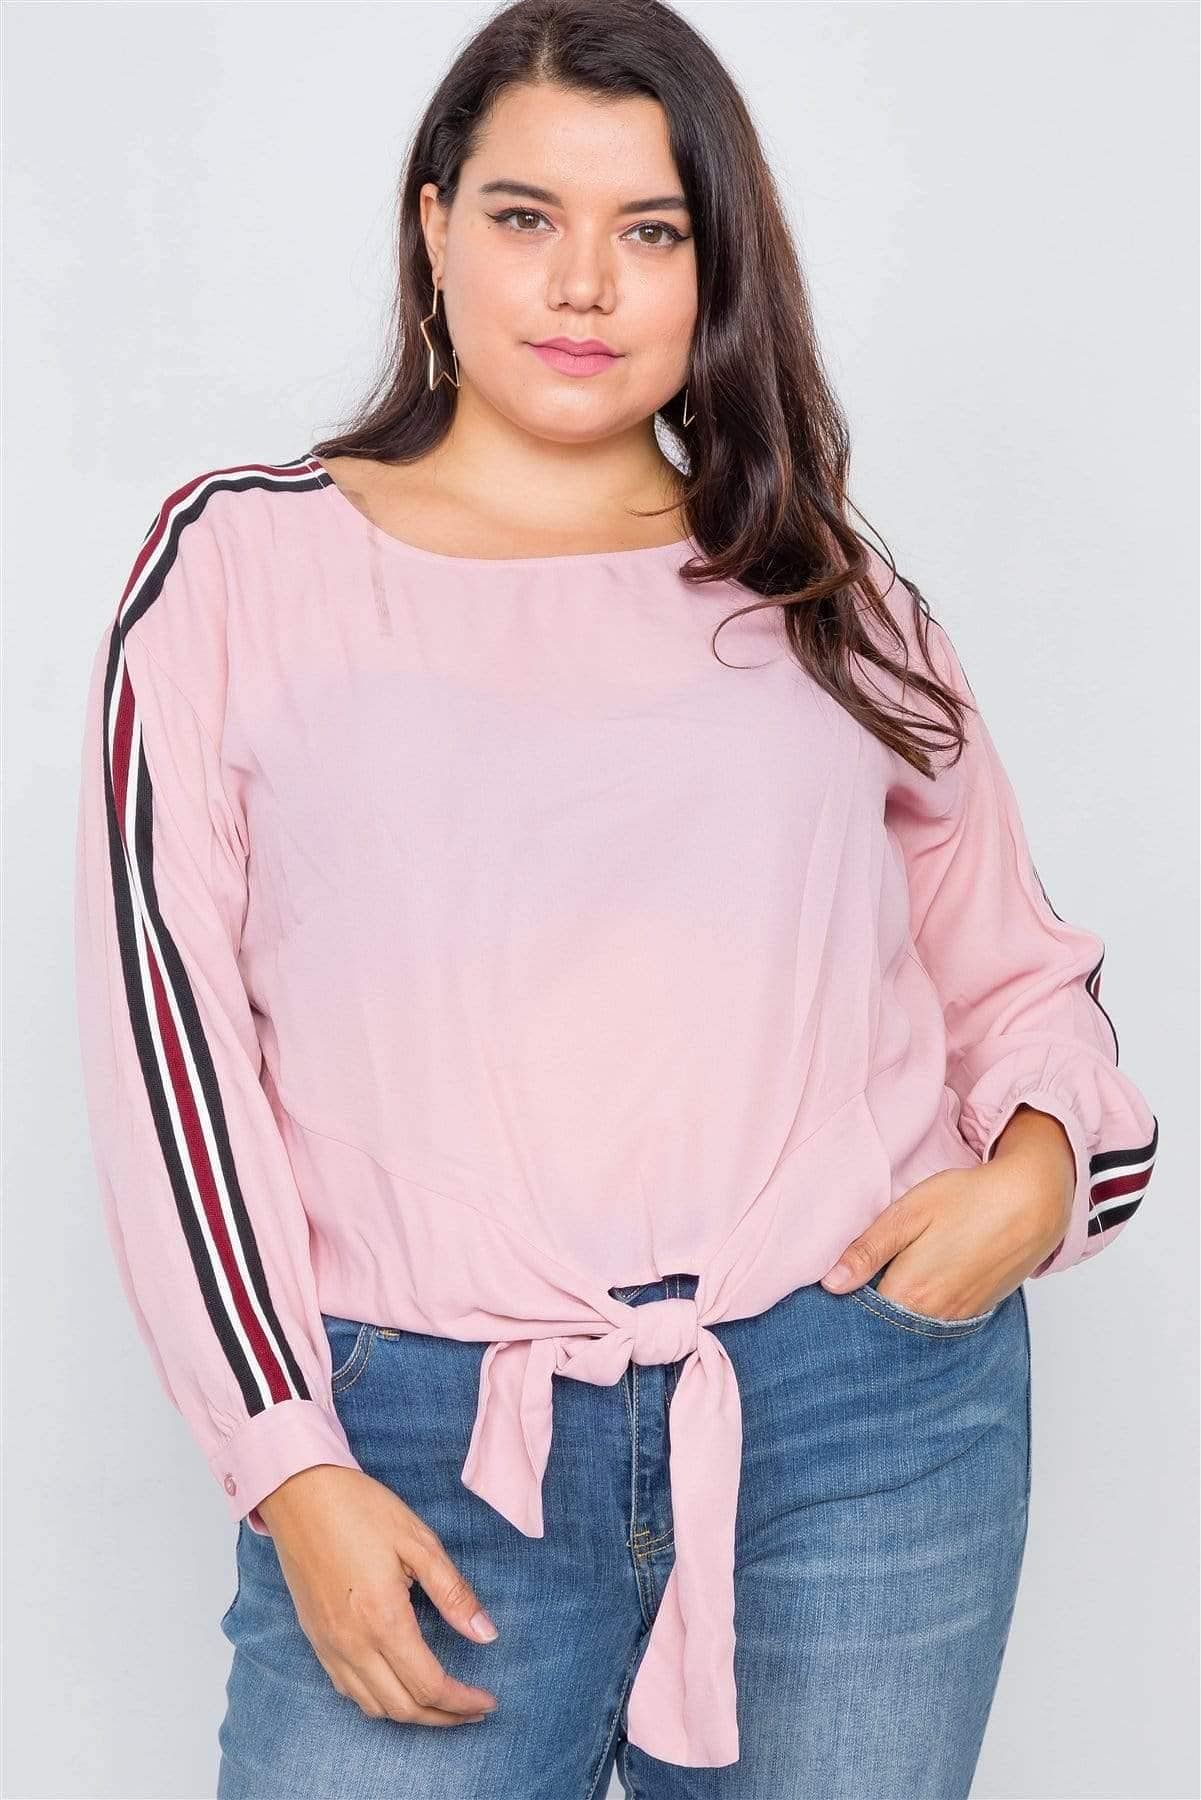 Pink Plus Size Long Sleeve Stripe Top - Shopping Therapy top